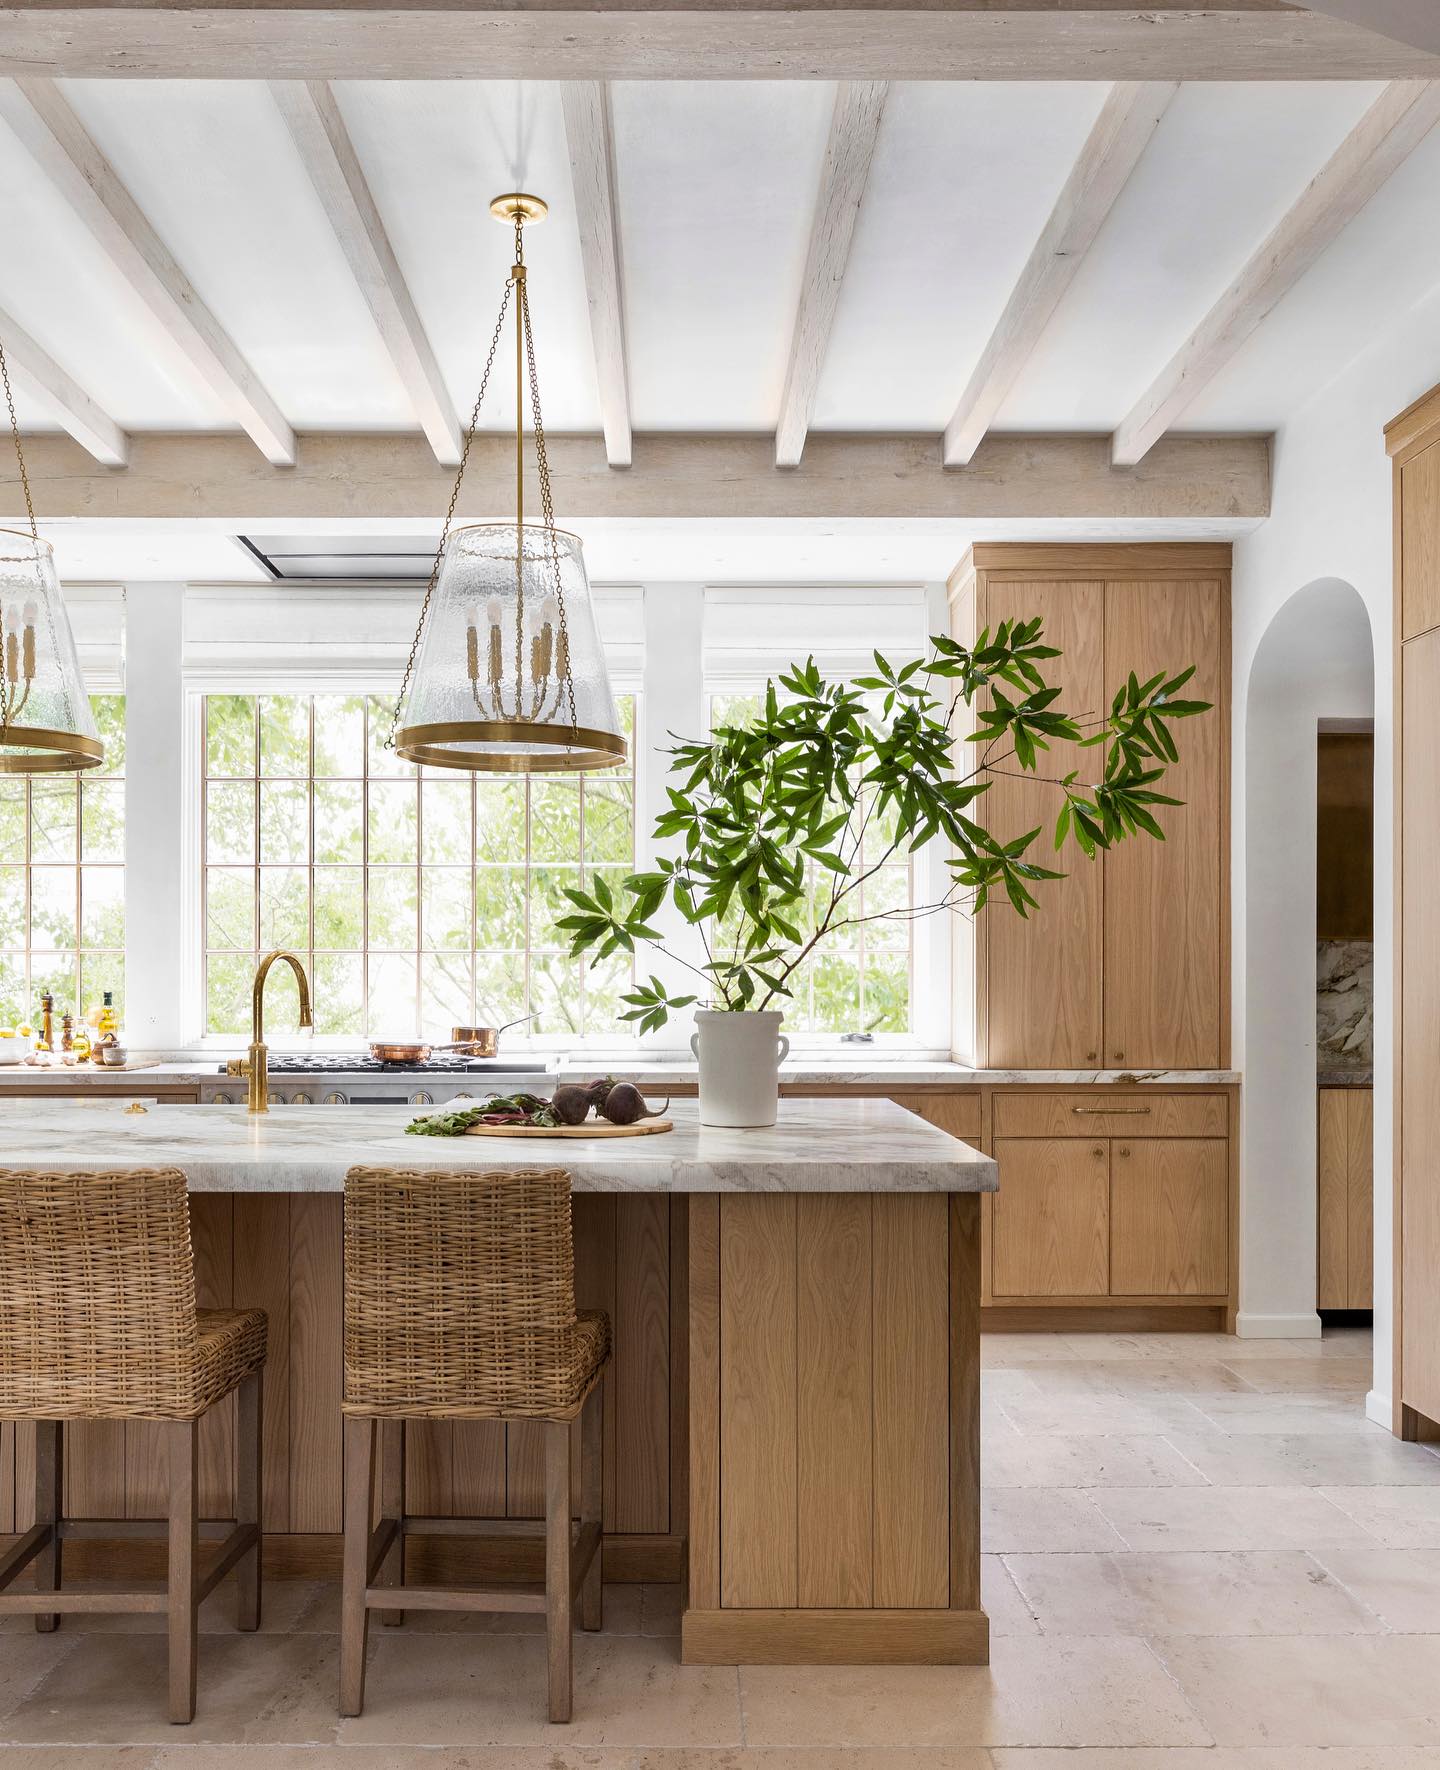 Luxurious bespoke kitchen with wood tone cabinetry - Marie Flanigan Interiors.